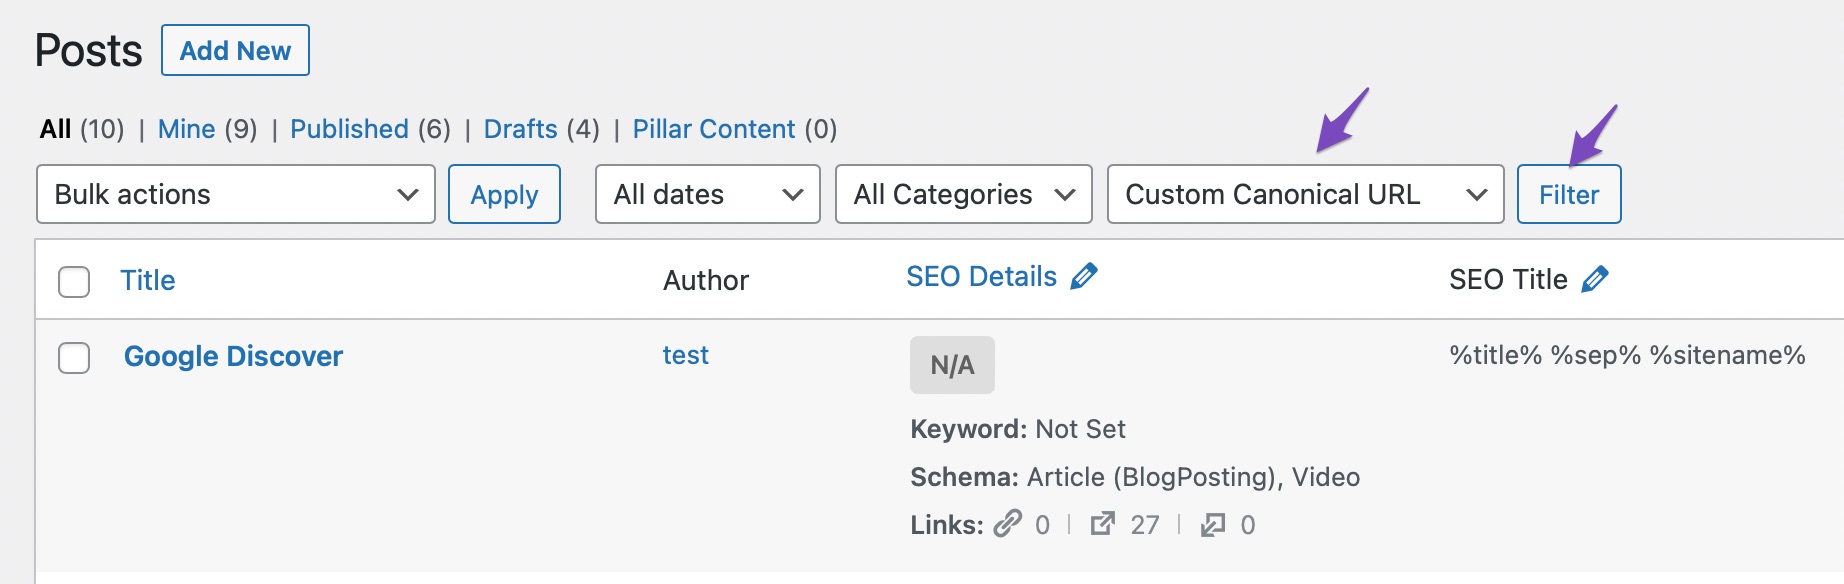 Filter by posts with custom canonical URL set